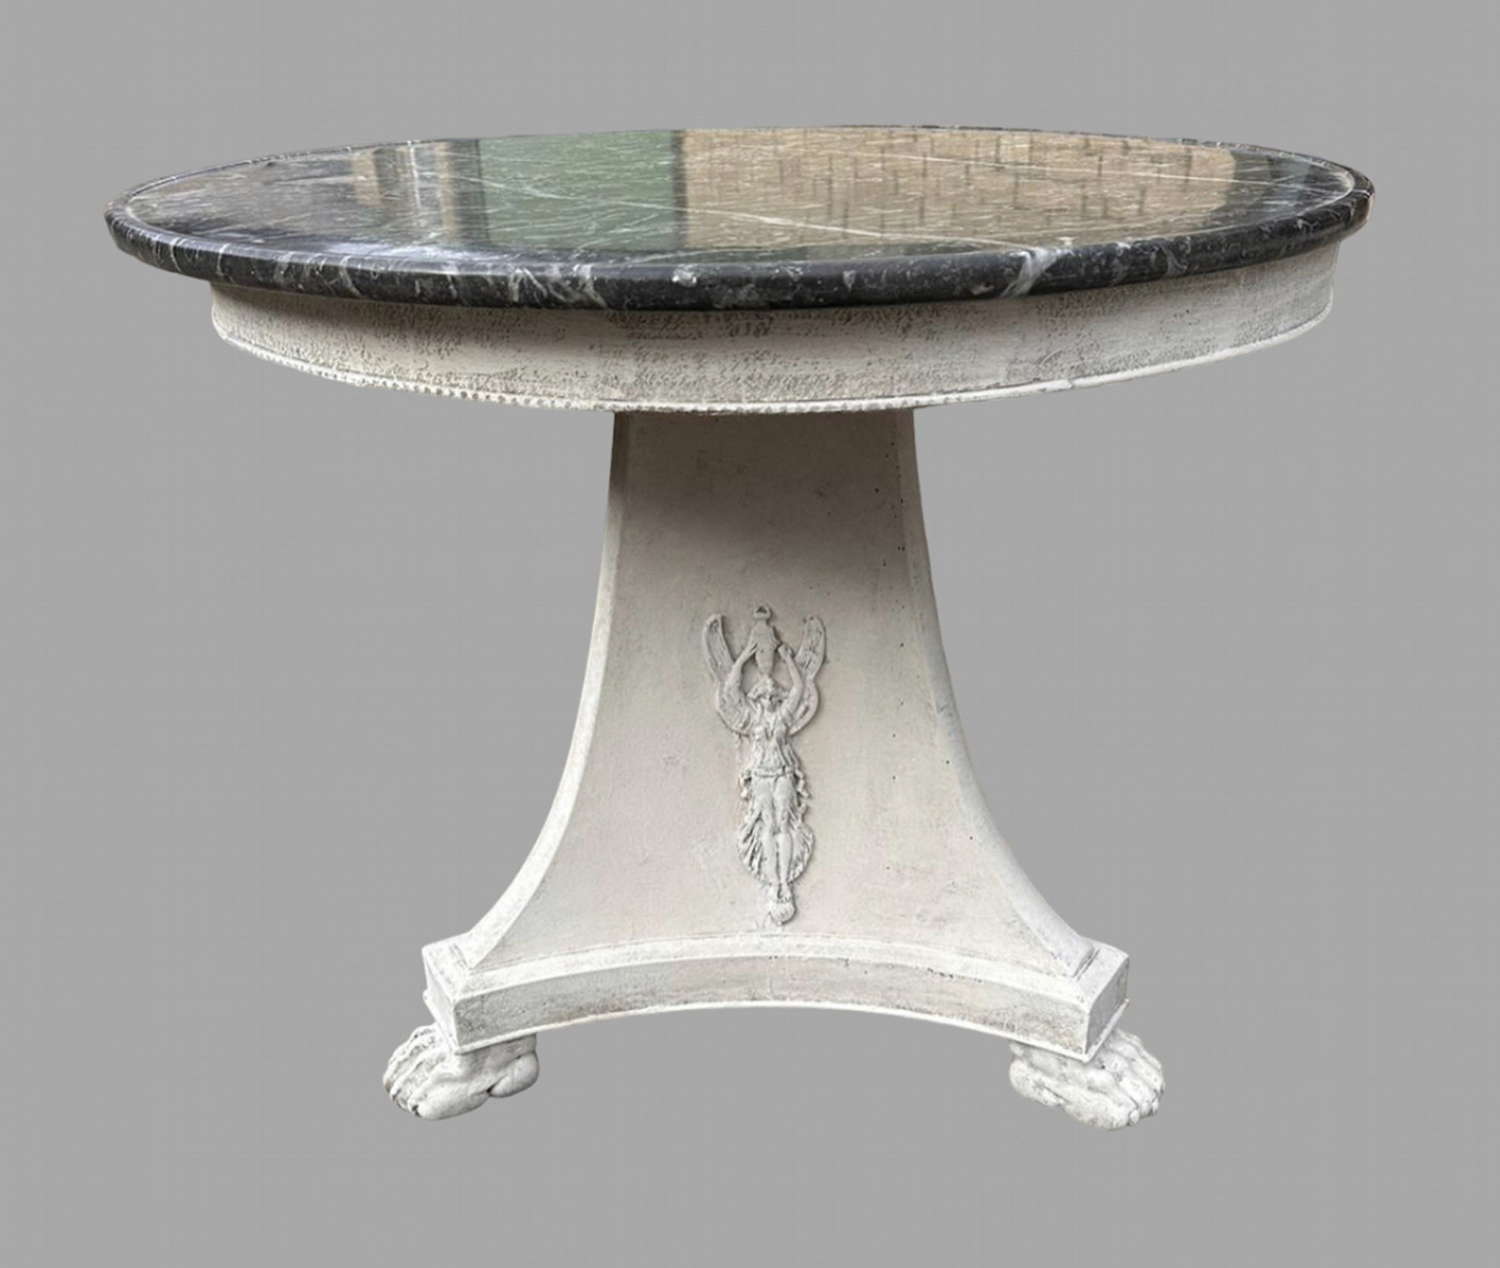 A c1820 Painted Gueridon Table